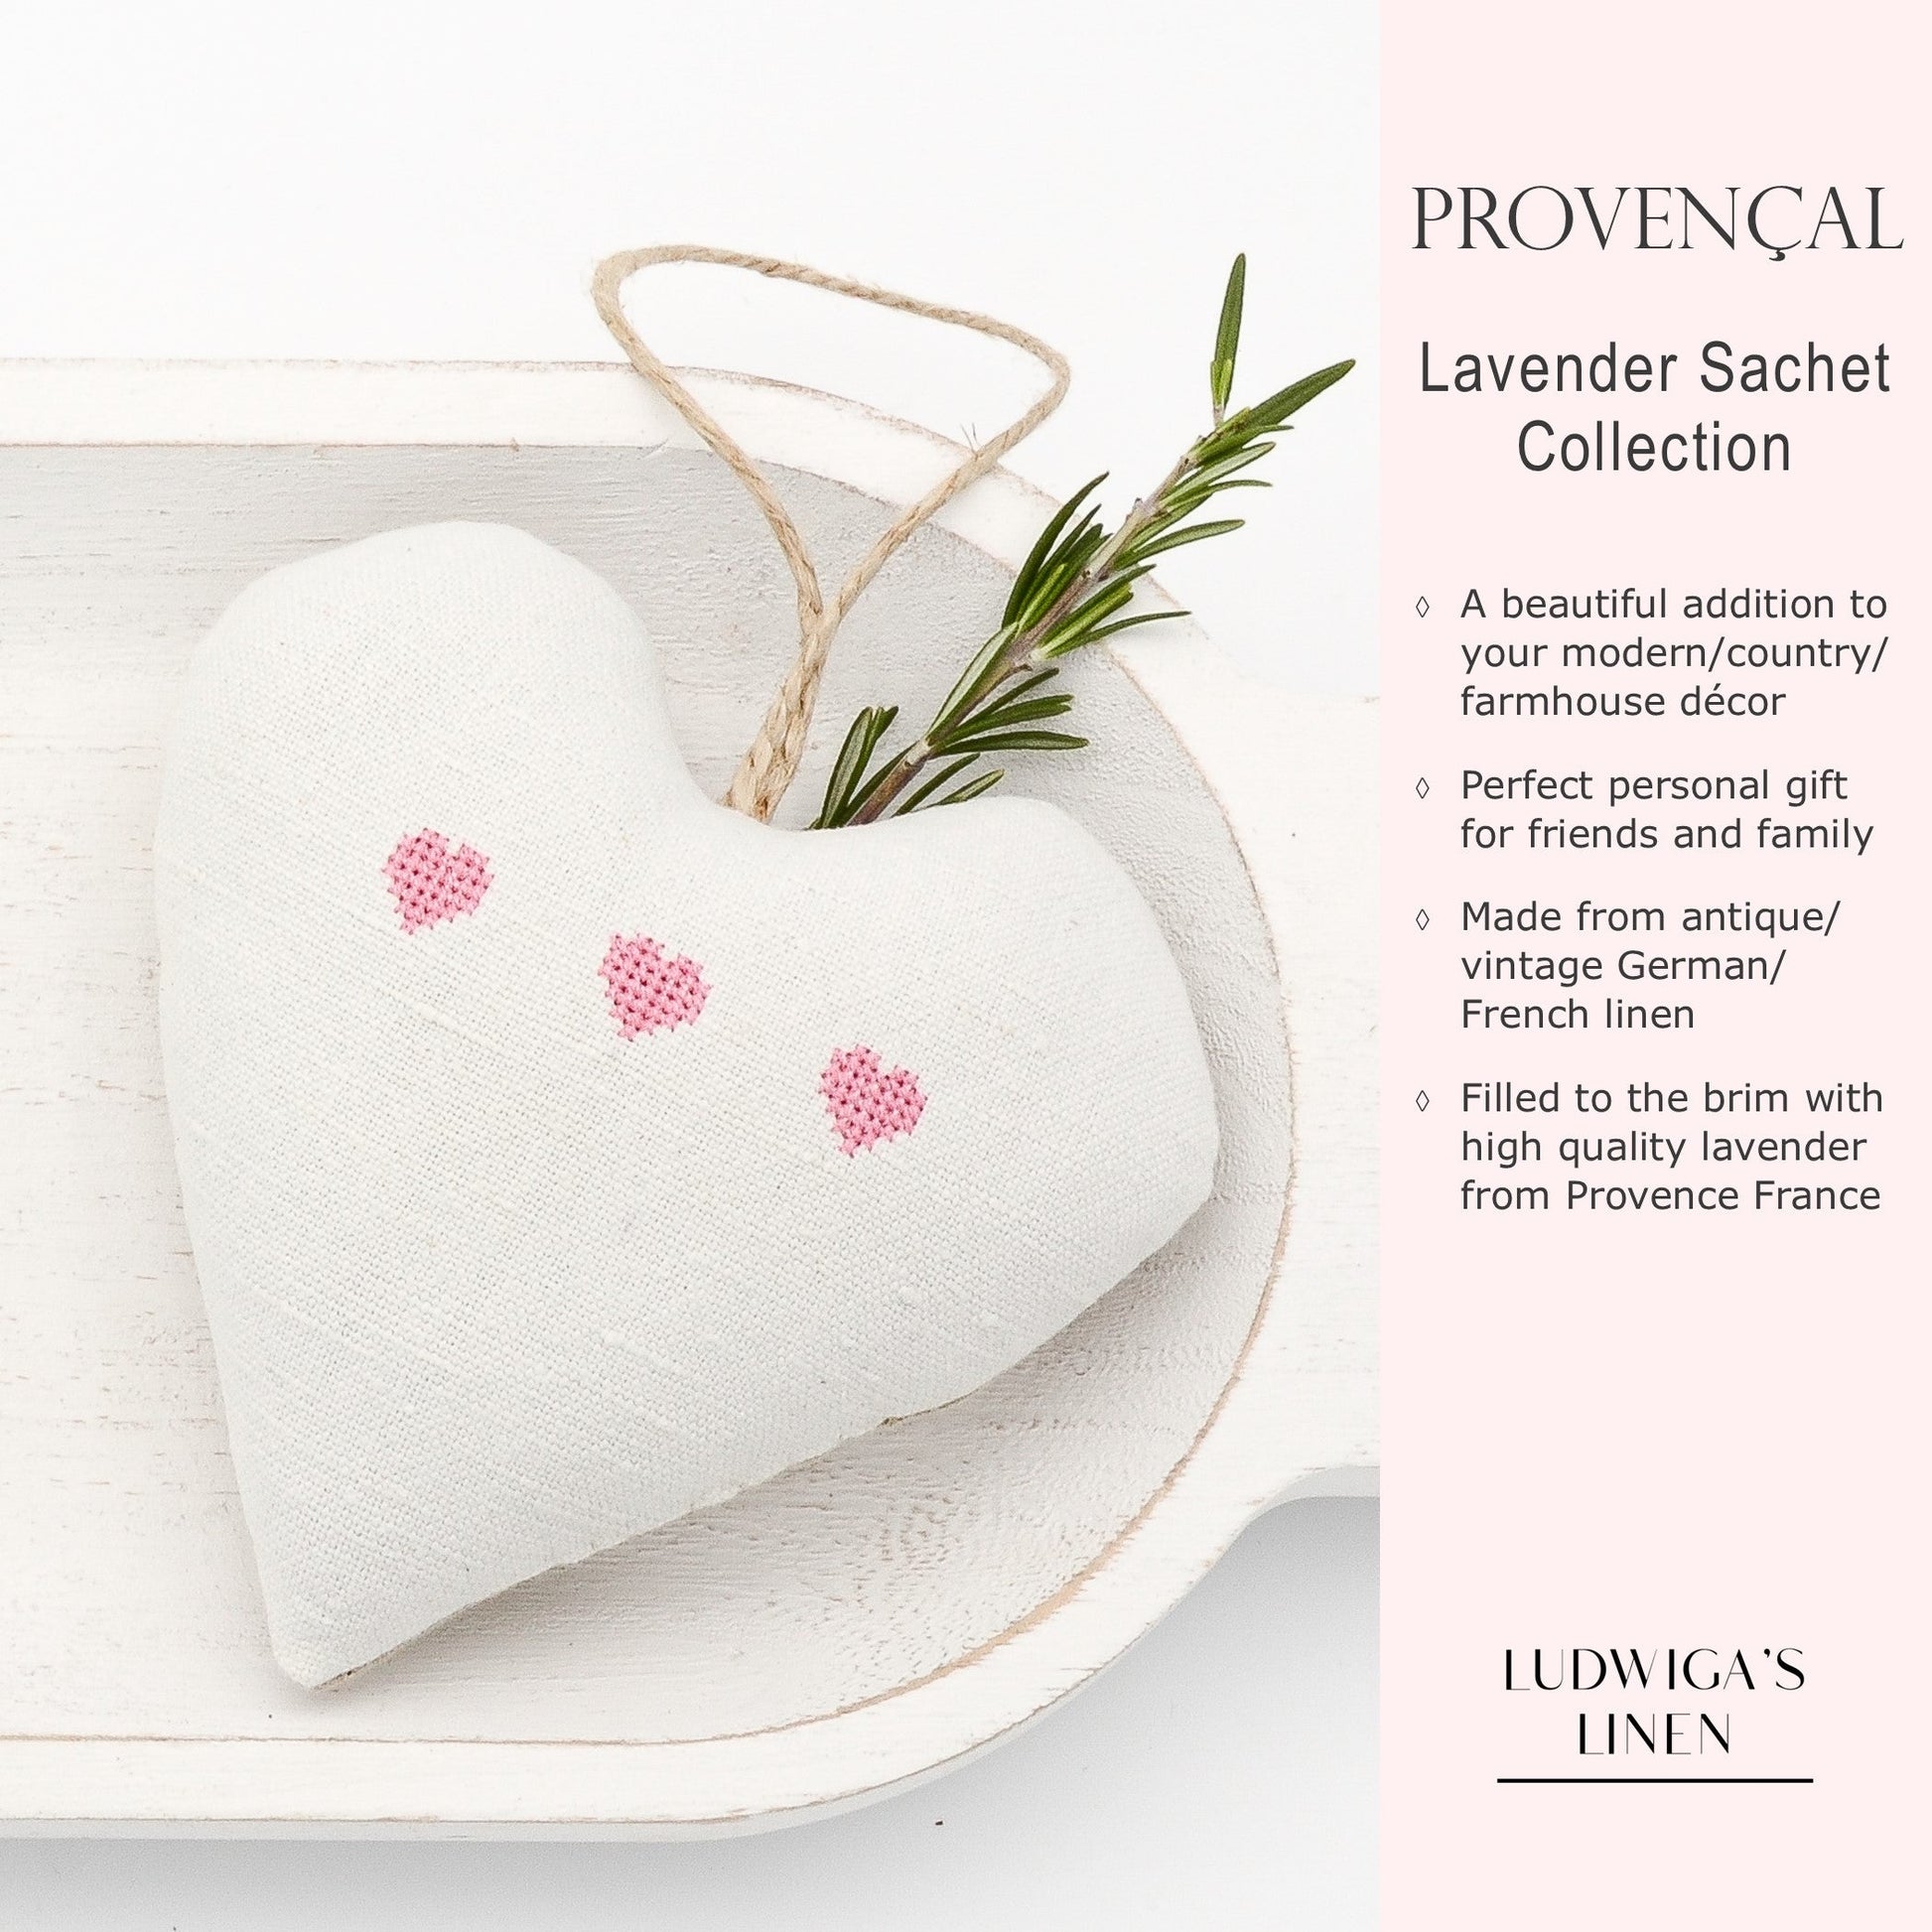 Antique/vintage European white linen lavender sachet heart with three pink embroidered hearts, hemp twine tie and filled with high quality lavender from Provence France